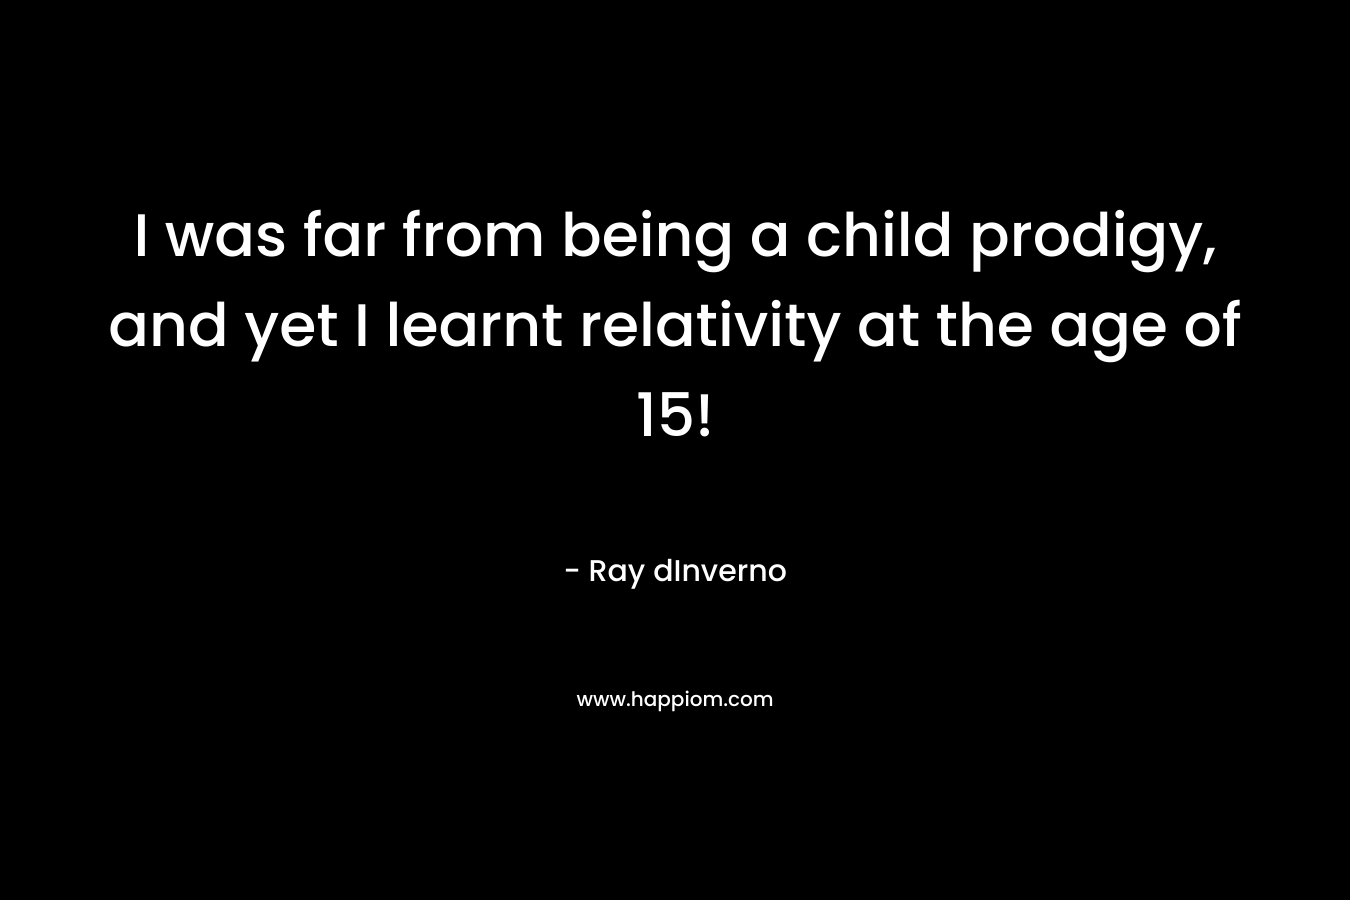 I was far from being a child prodigy, and yet I learnt relativity at the age of 15!